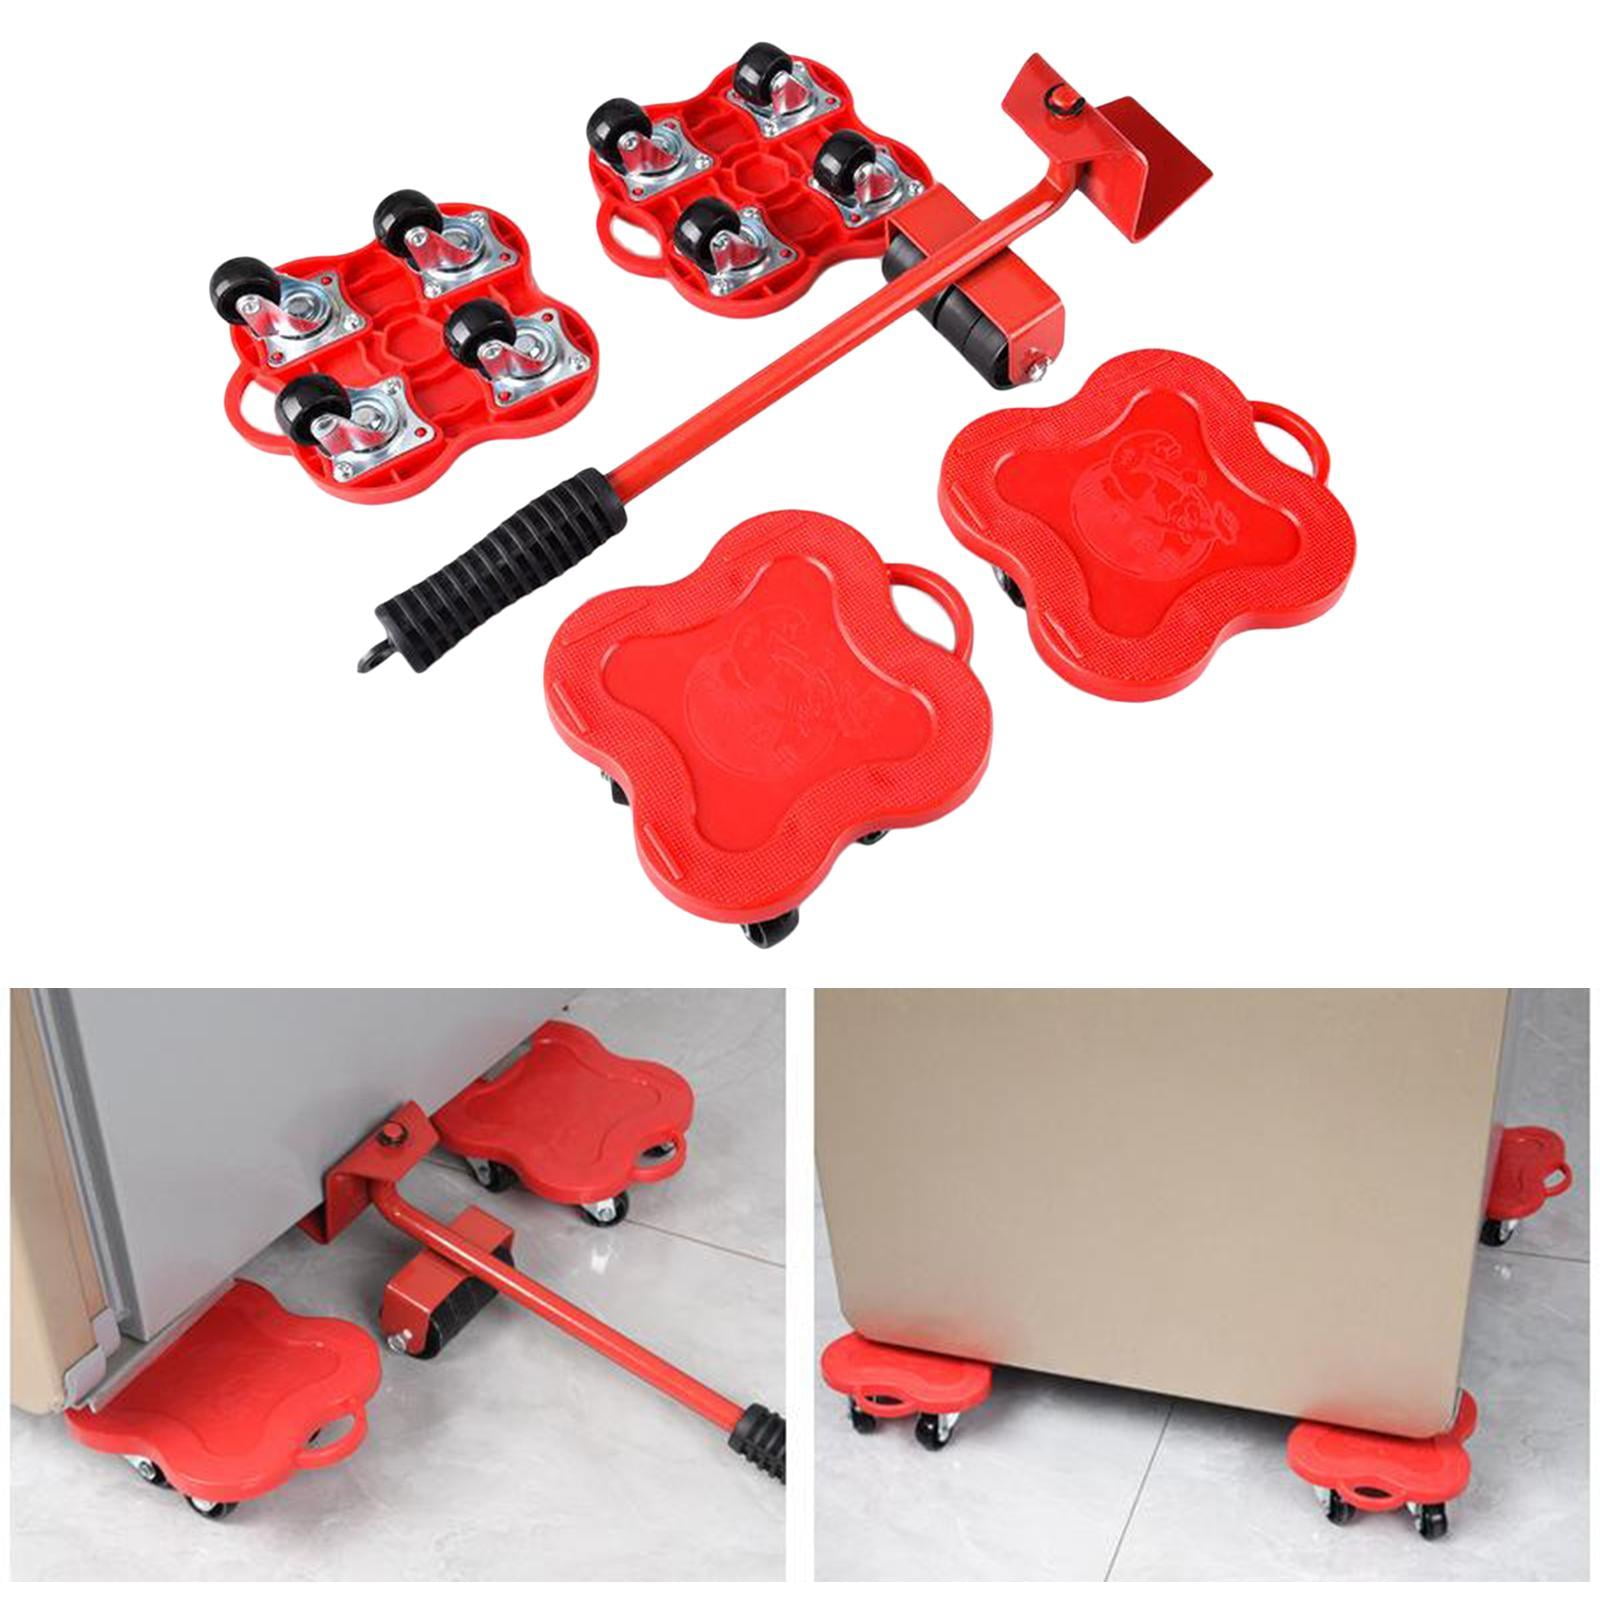 Buy Arkioo Furniture Lifters for Heavy Furniture with Wheel